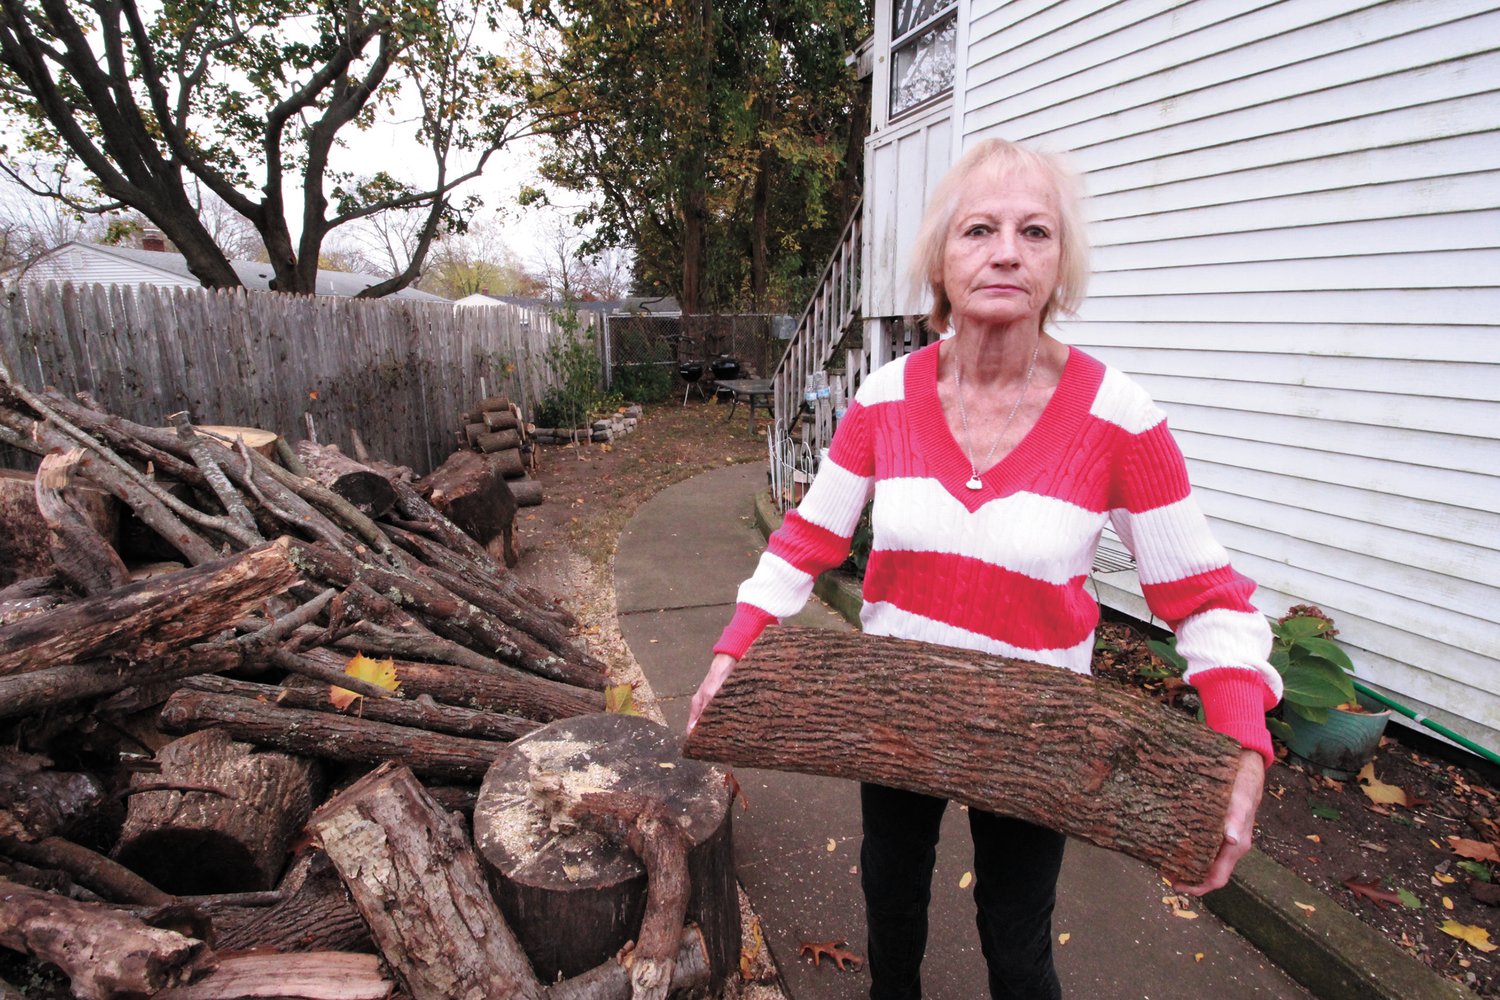 SHE CAN HANDLE IT:  As long as she has access to wood, Beatrice “Cookie” Pelletier will find a way of using it to heat her home, (Warwick Beacon photo)